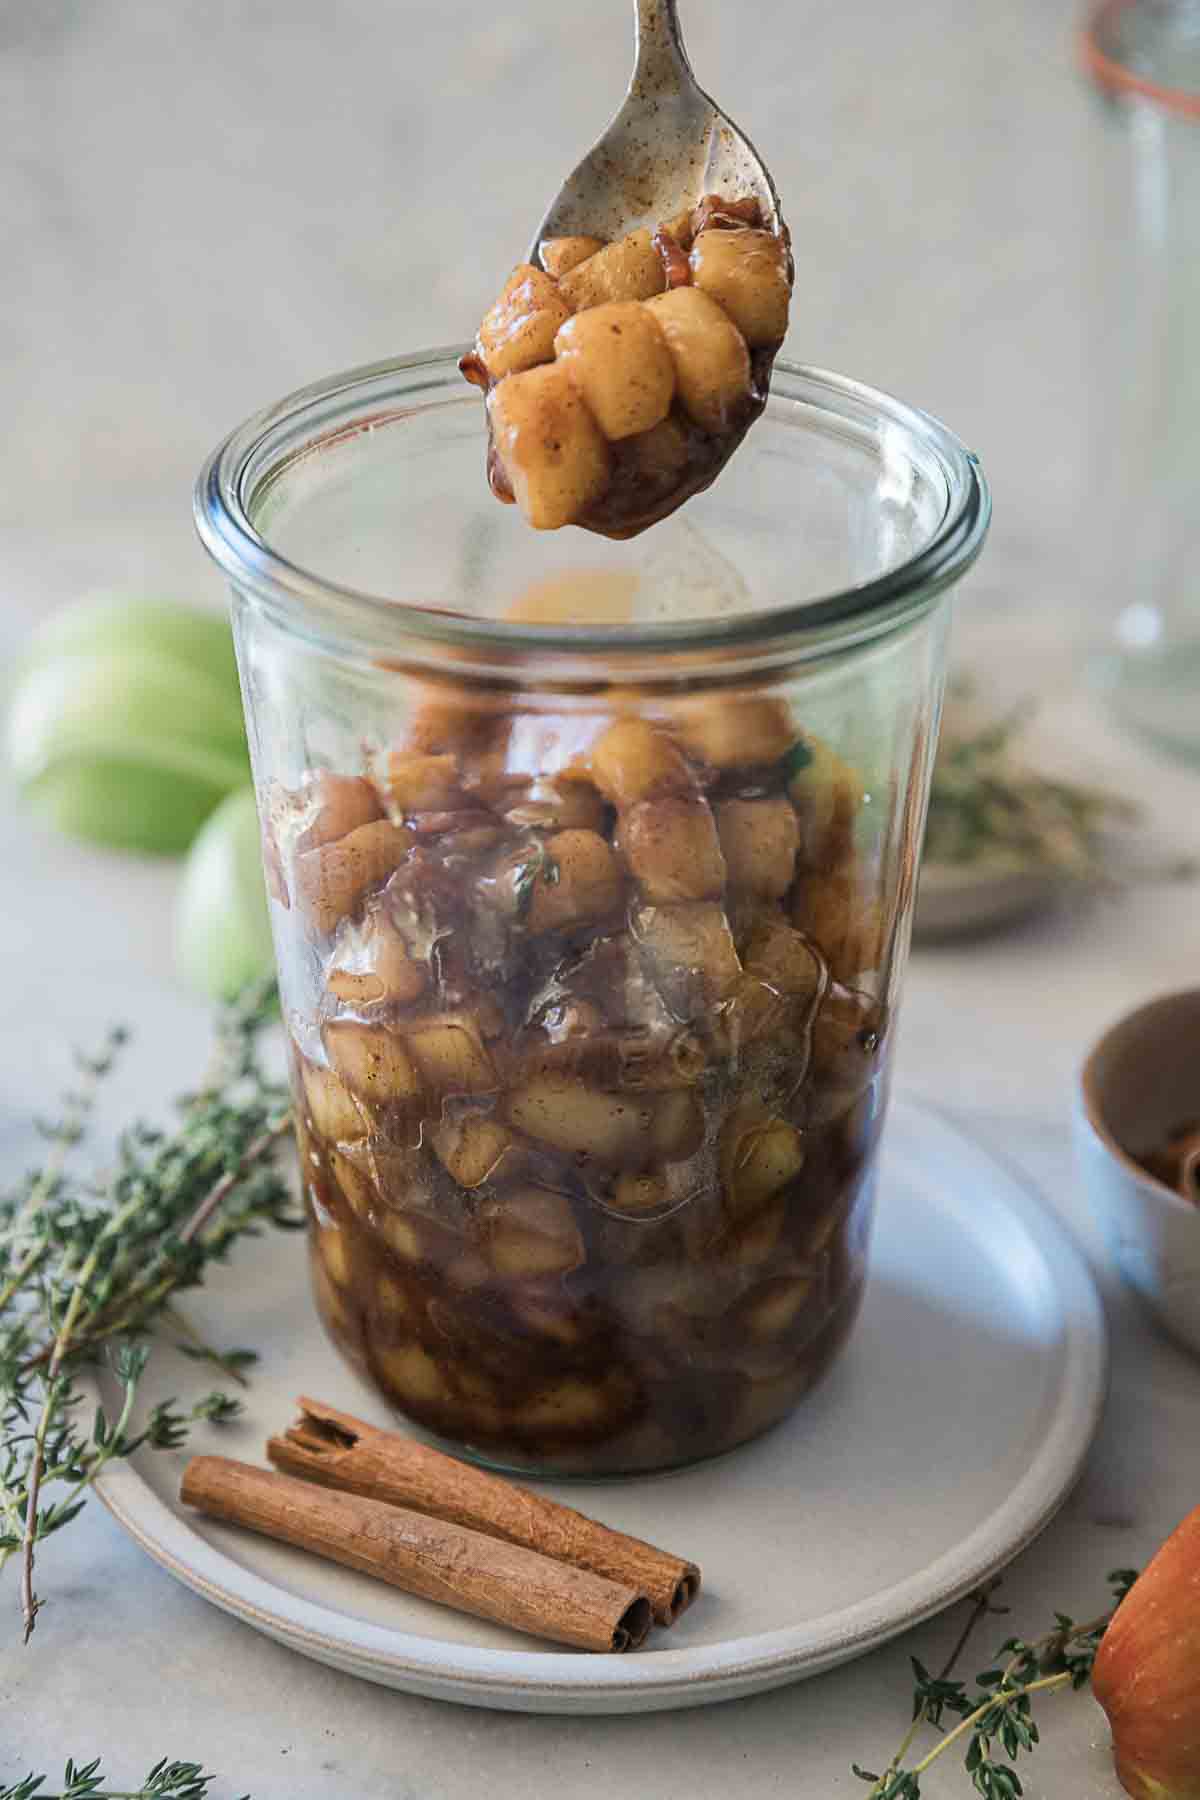 Cinnamon apples in a glass jar. There are cinnamon sticks and thyme to the side.